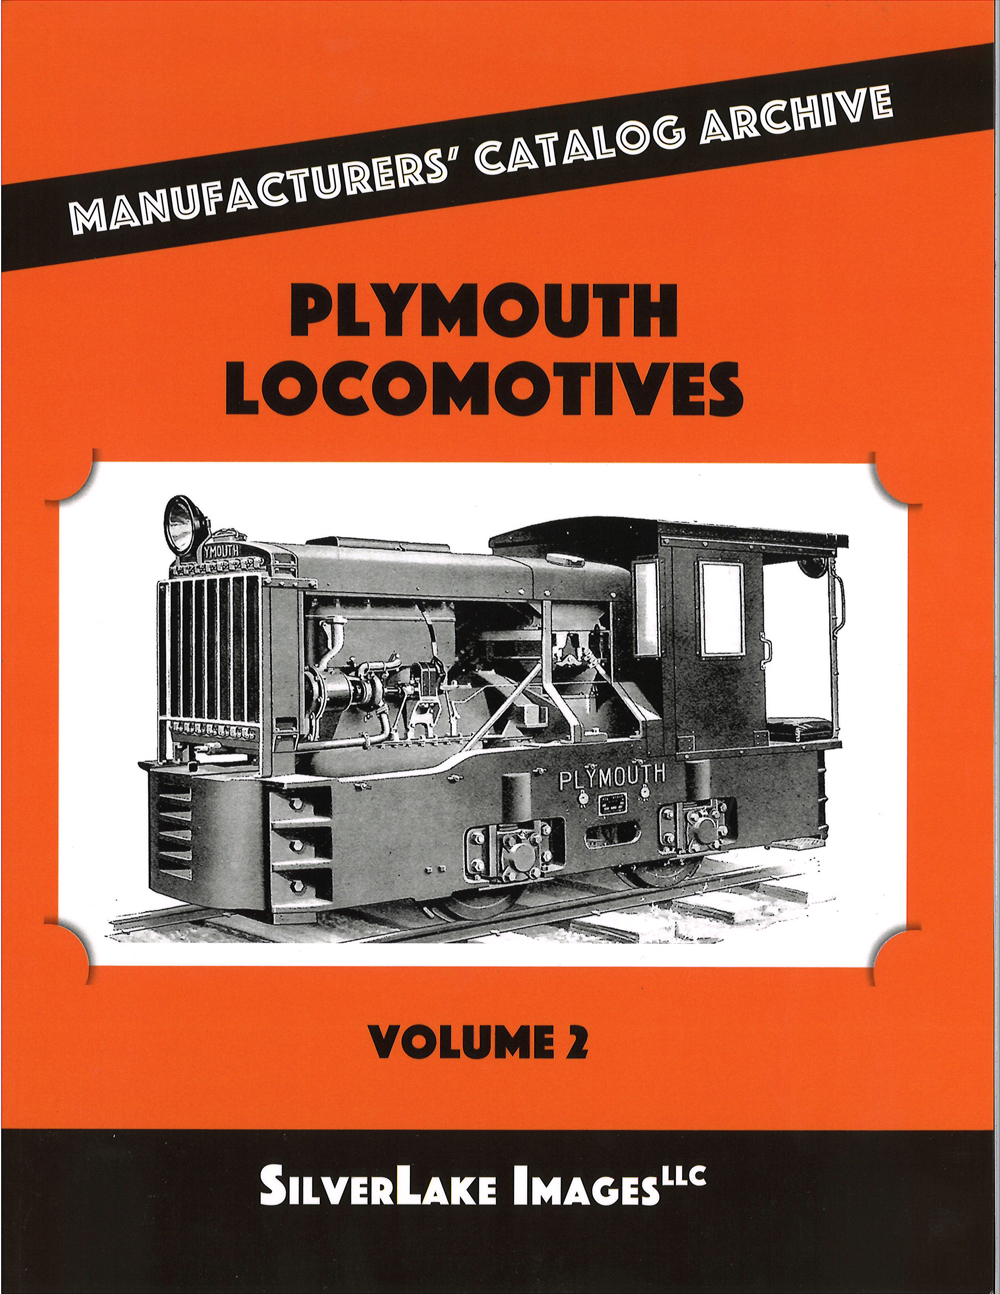 Plymouth Locomotives, Vol. 2: An orange catalog with black text and a black and white image of a locomotive